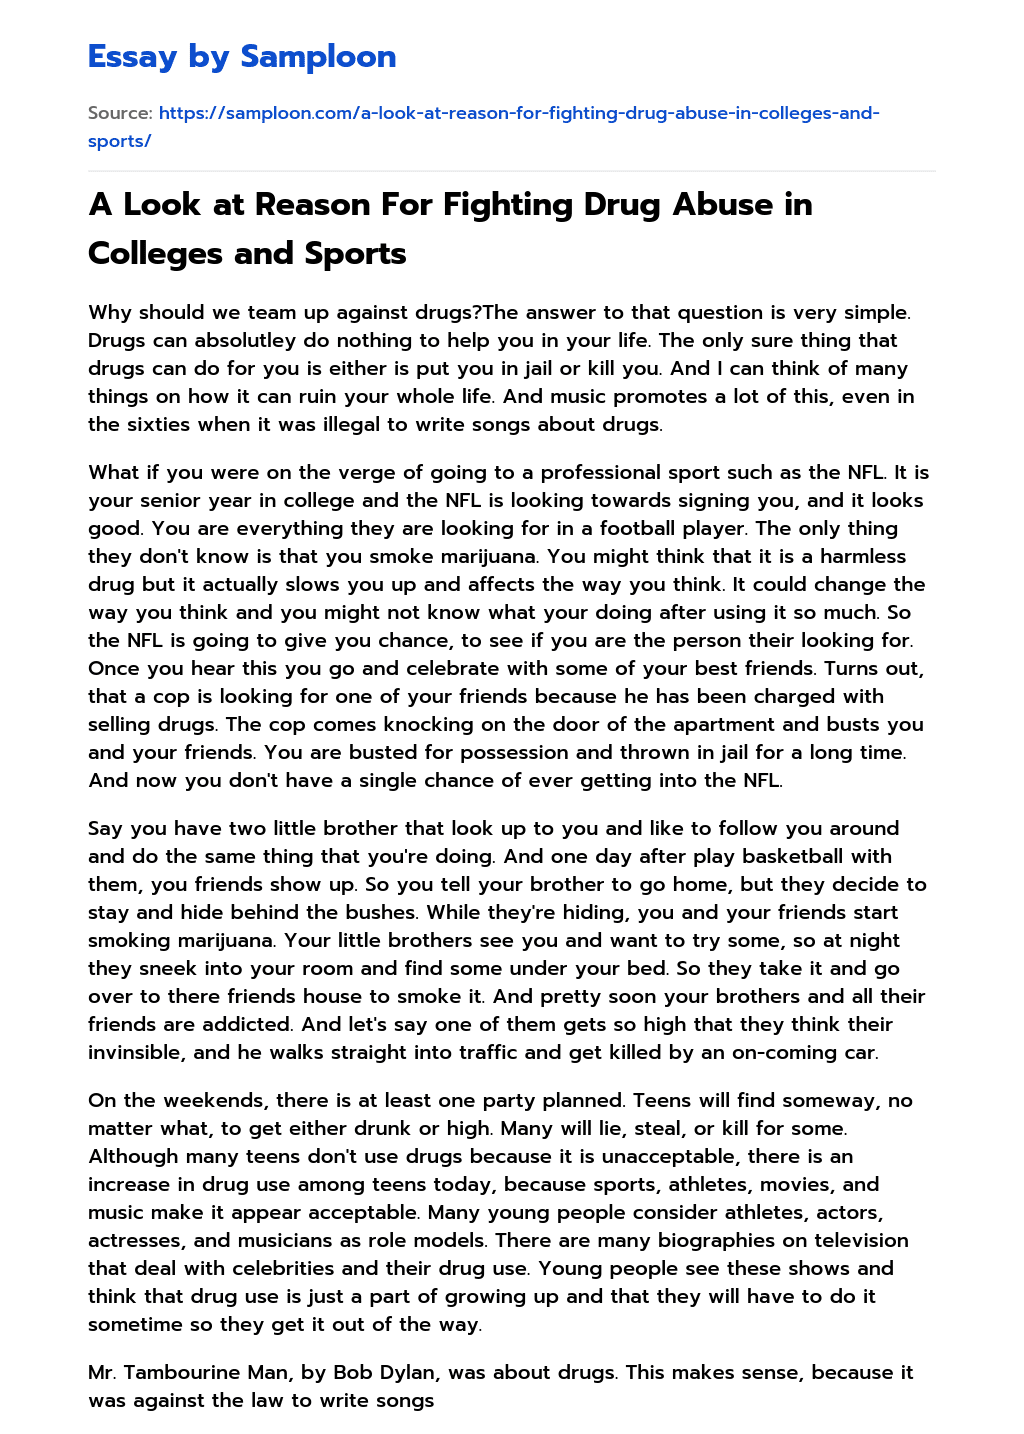 A Look at Reason For Fighting Drug Abuse in Colleges and Sports essay